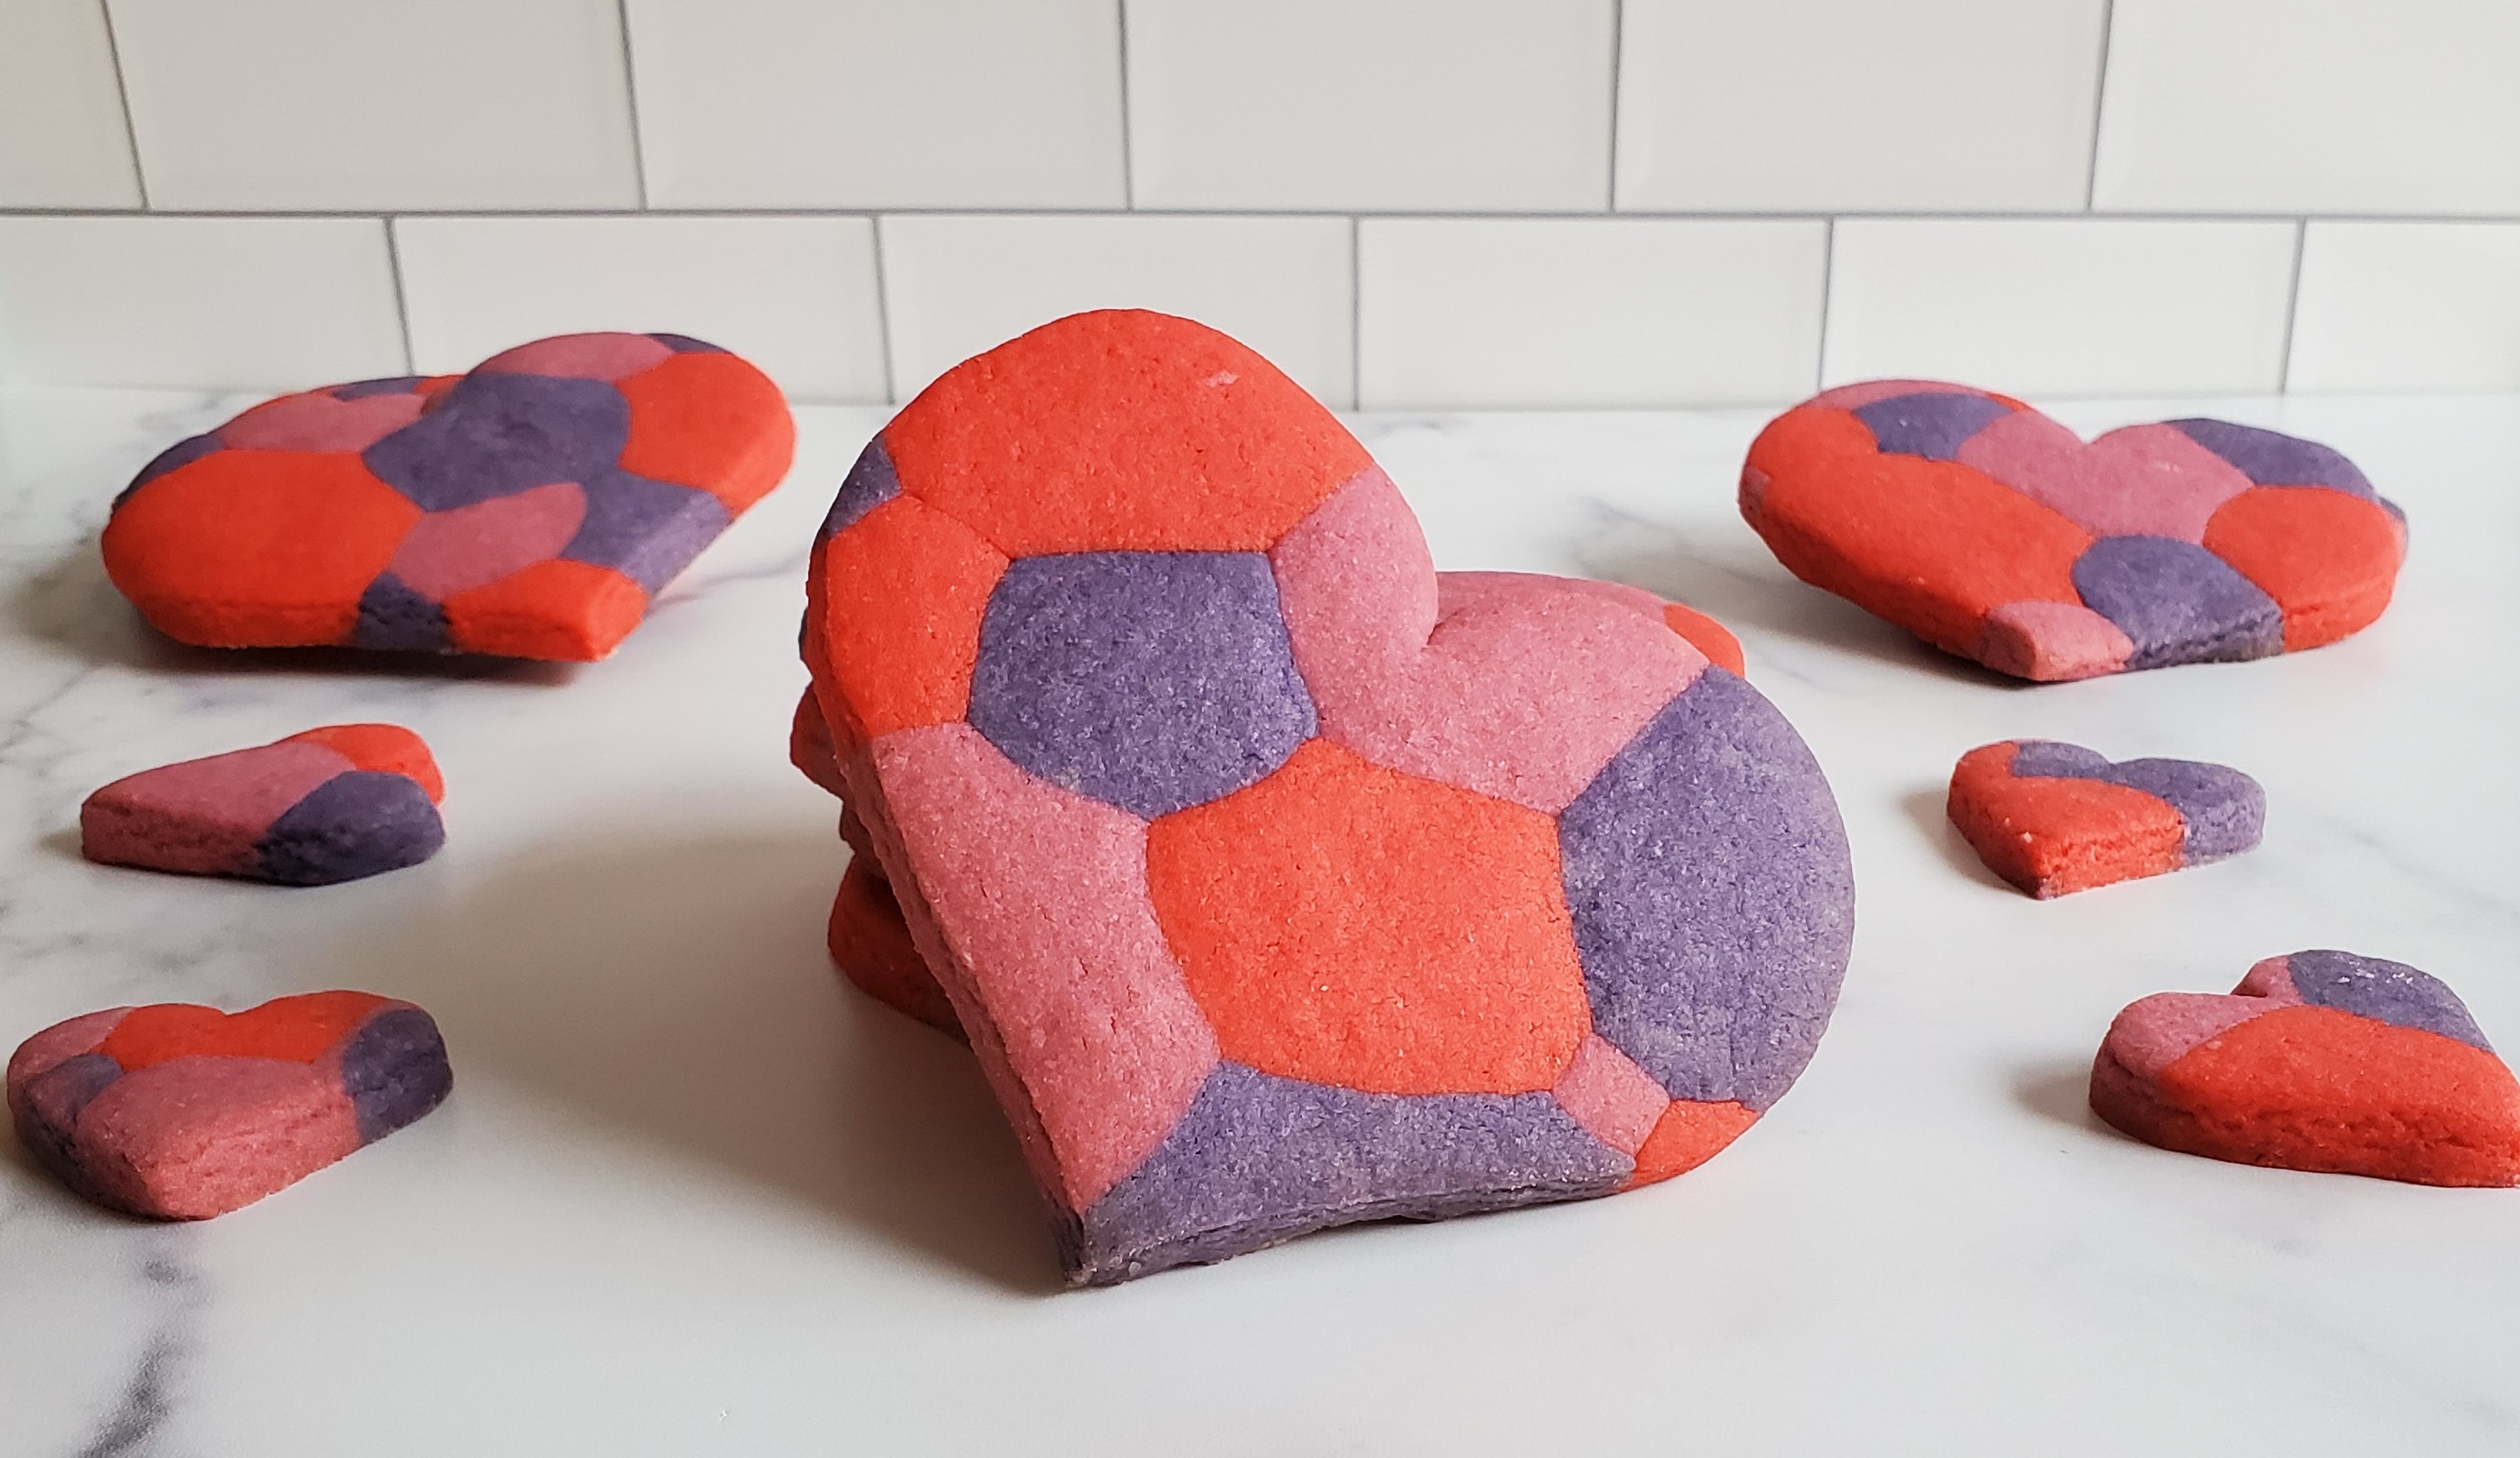 A large heart shaped sugar cookie with a marbled/mosaic pattern sits resting against a stack of more of the same cookies. On the sides we see slightly smaller heart shaped cookies of the same pattern. There are more large cookies in the back slightly propped up. All of this is on a white marble countertop against a subway tile backsplash.